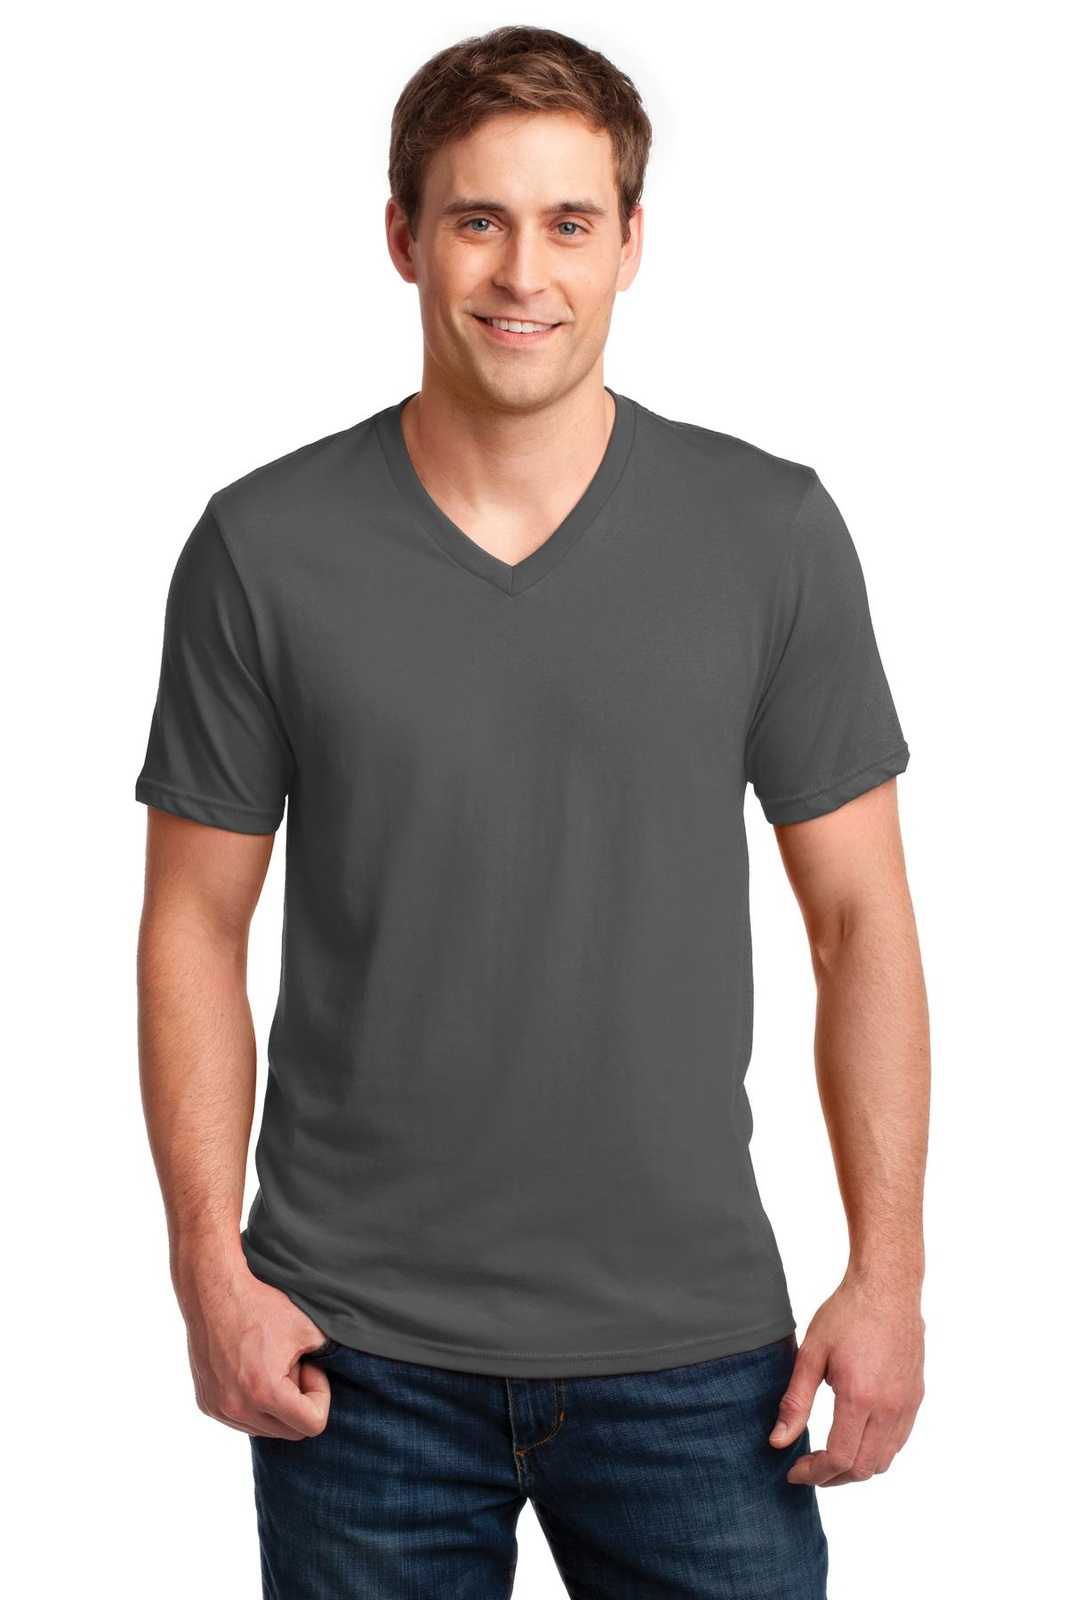 Anvil A982 100% Combed Ring Spun Cotton V-Neck T-Shirt - Charcoal - HIT a Double